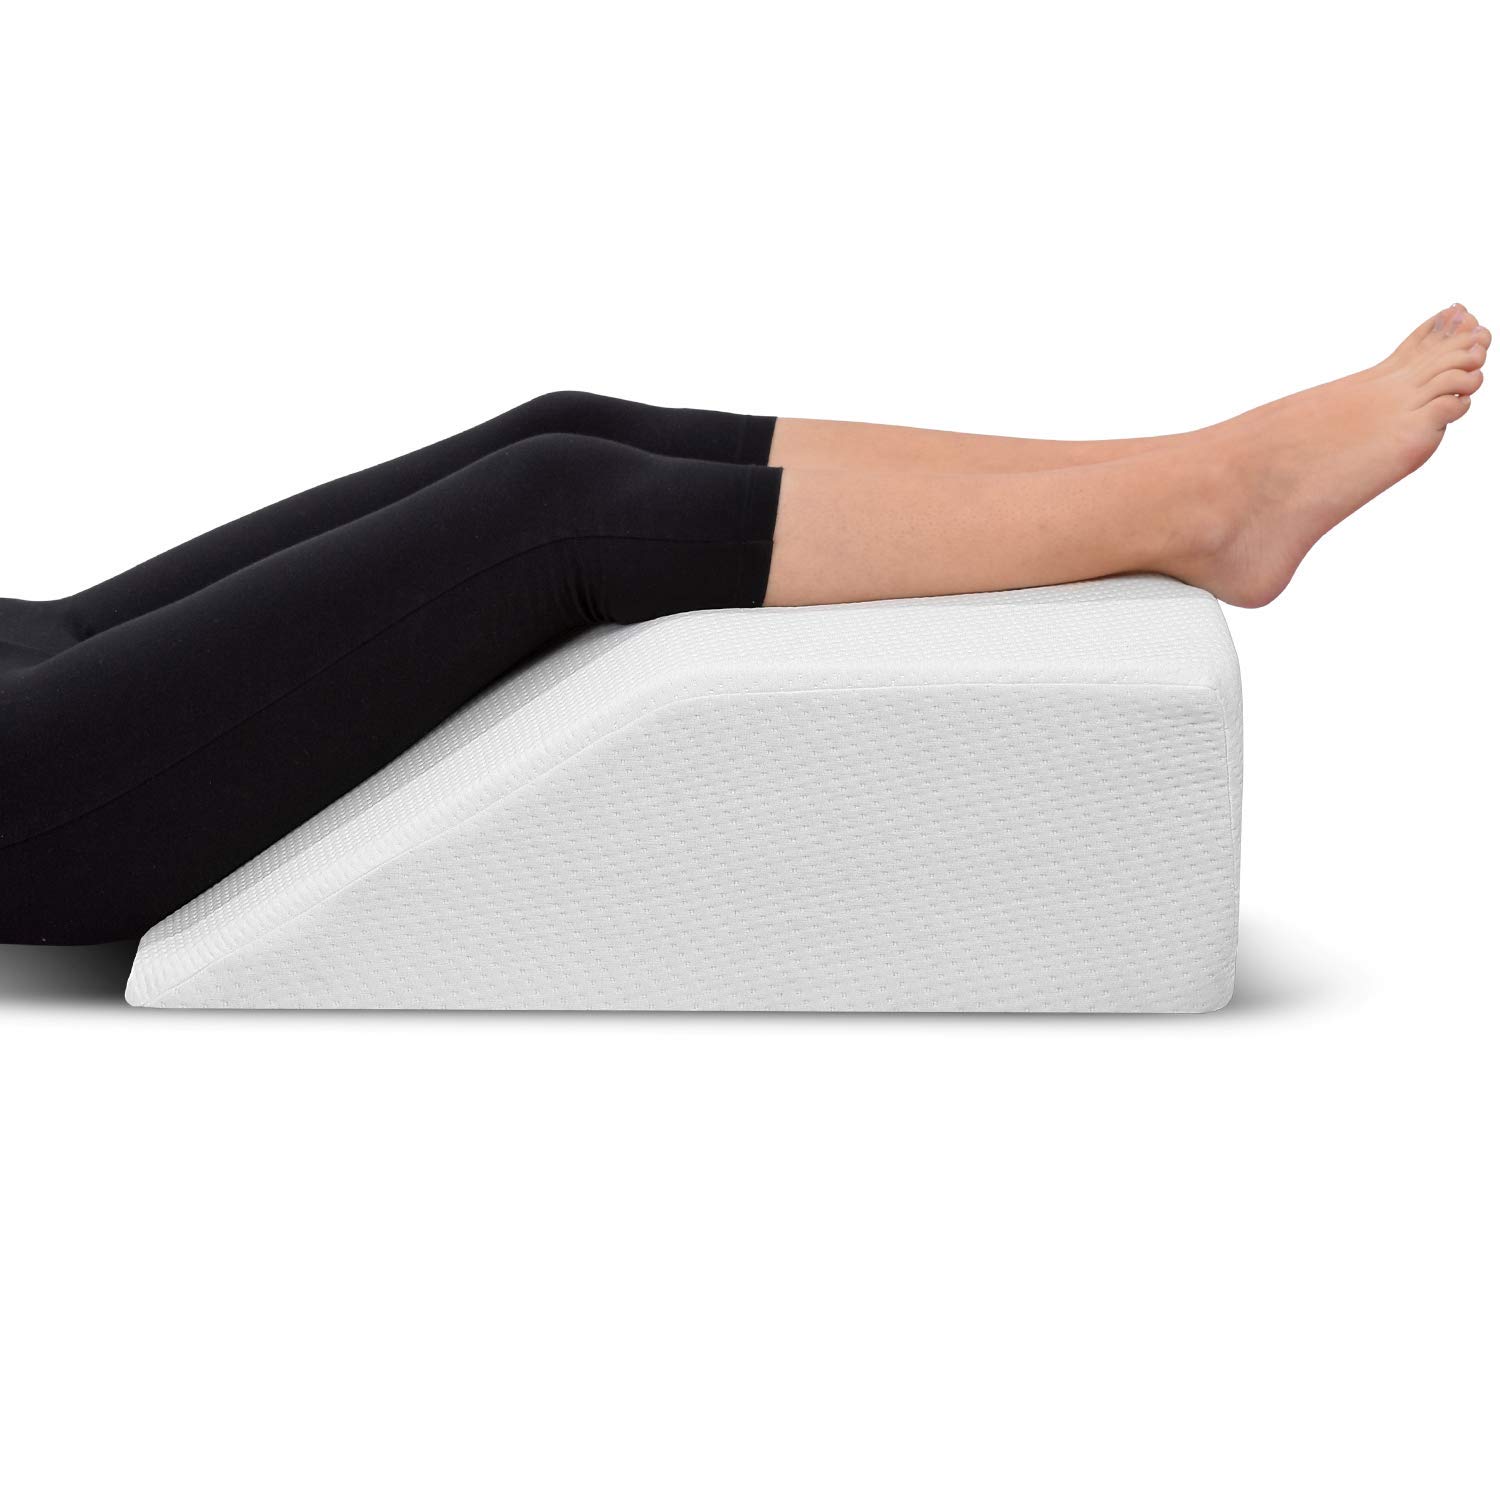 Relieve sciatica pain with a memory foam pillow like this one